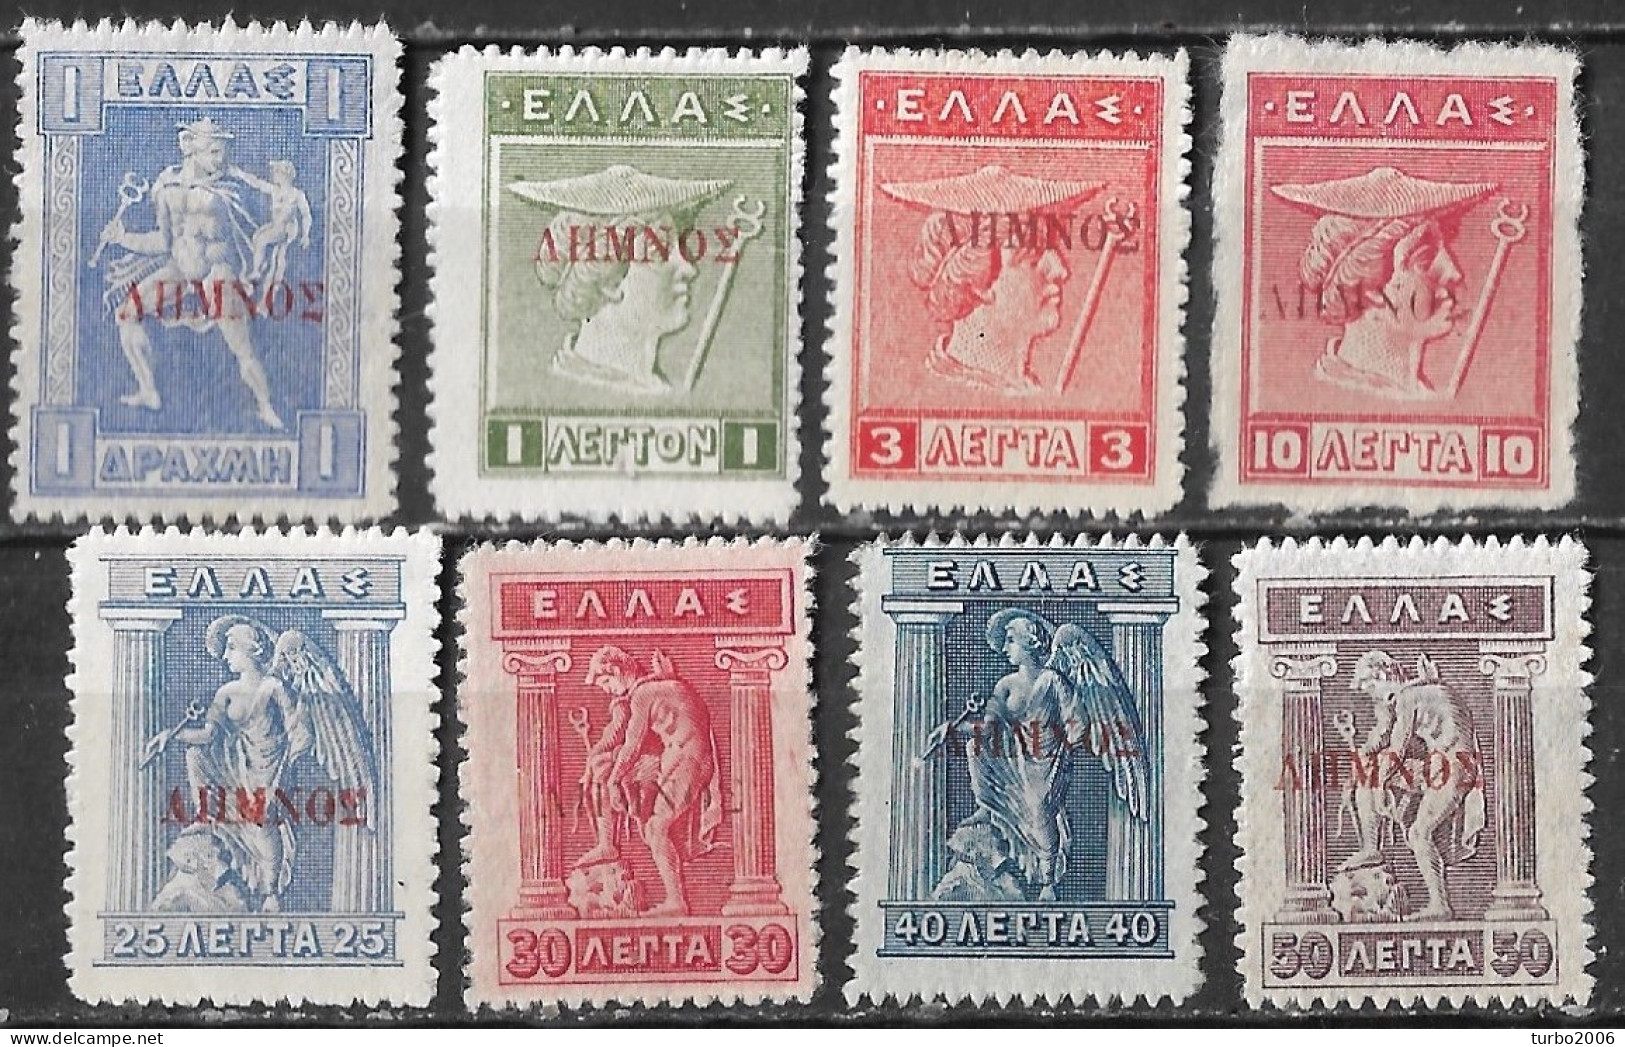 LEMNOS 1912 Greek Stamps With Red Overprint ΛEMNOΣ 8 Values From The Set Vl. 23-25-27-29/33 MH - Lemnos